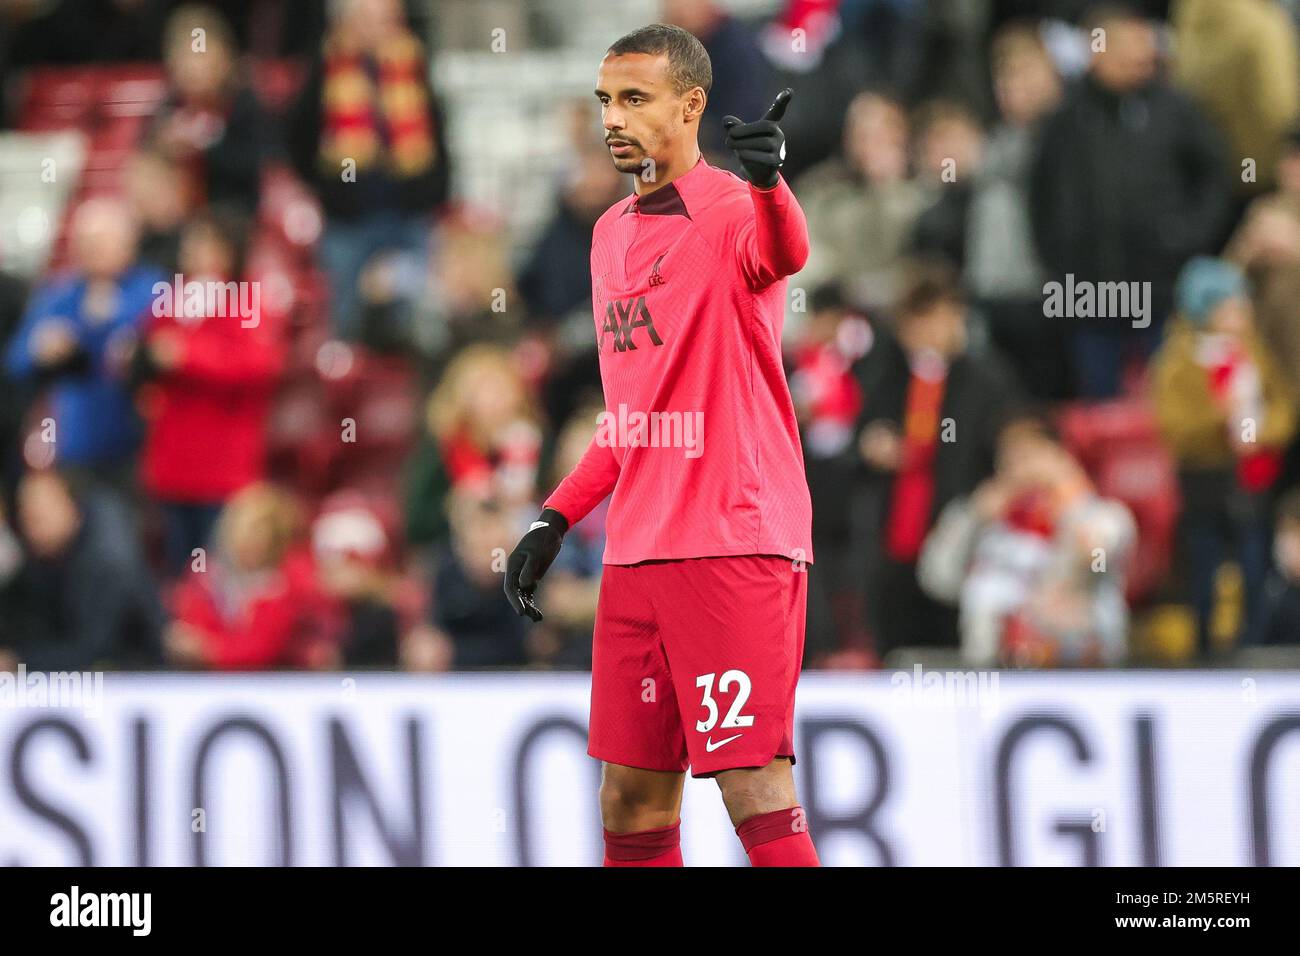 Joel Matip #32 of Liverpool during the pre-game warmup ahead of the Premier League match Liverpool vs Leicester City at Anfield, Liverpool, United Kingdom, 30th December 2022  (Photo by Mark Cosgrove/News Images) Stock Photo